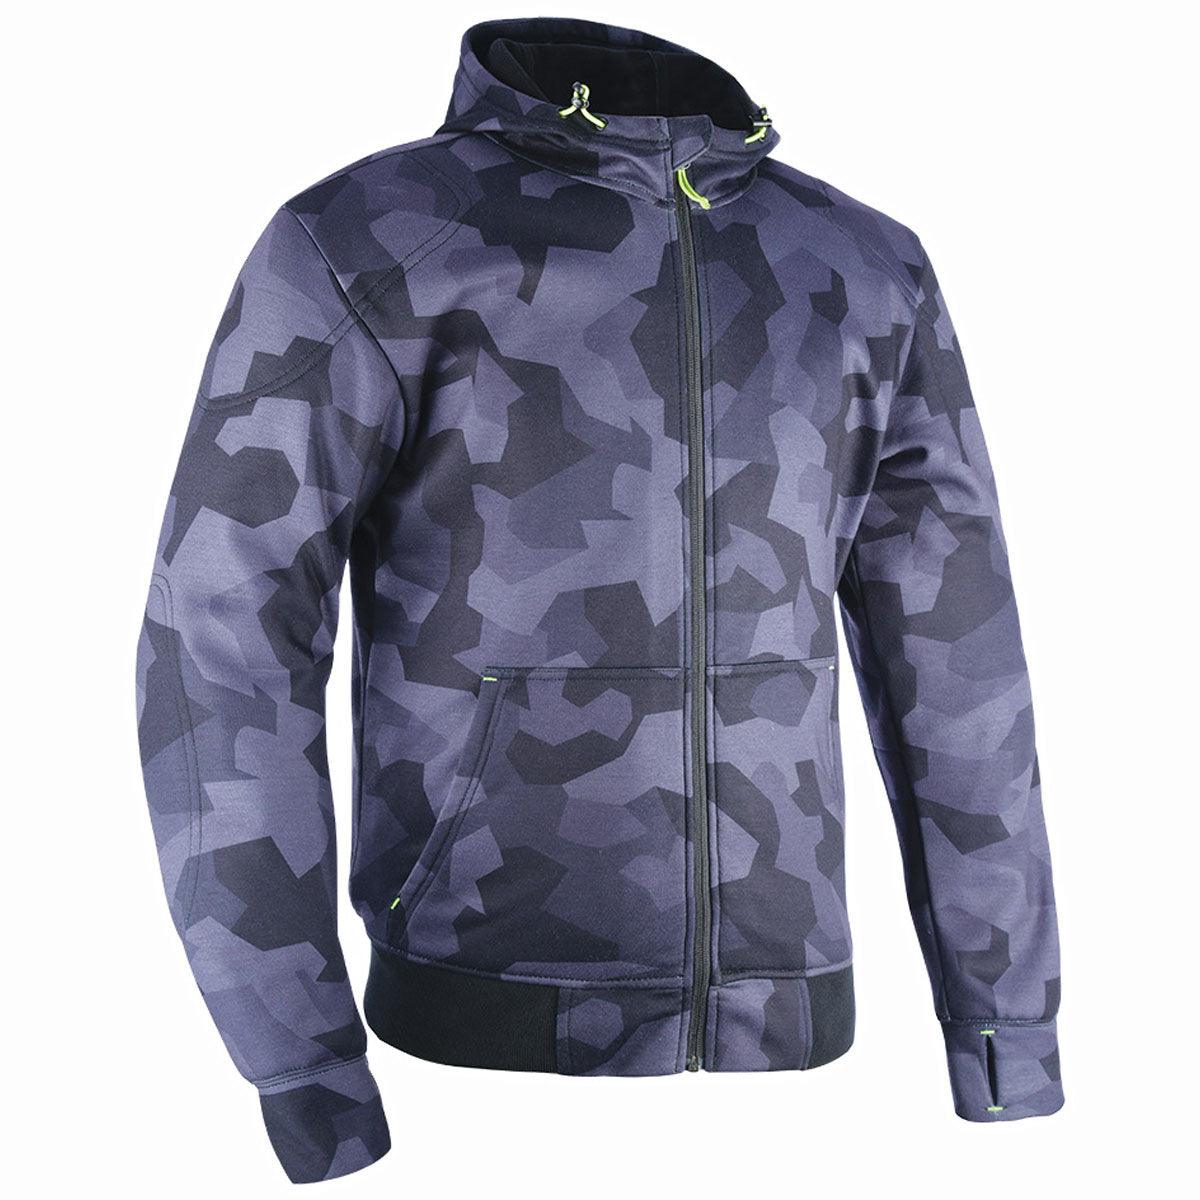 Oxford Super Hoodie 2.0 - Grey Camo - Browse our range of Clothing: Hoodies - getgearedshop 